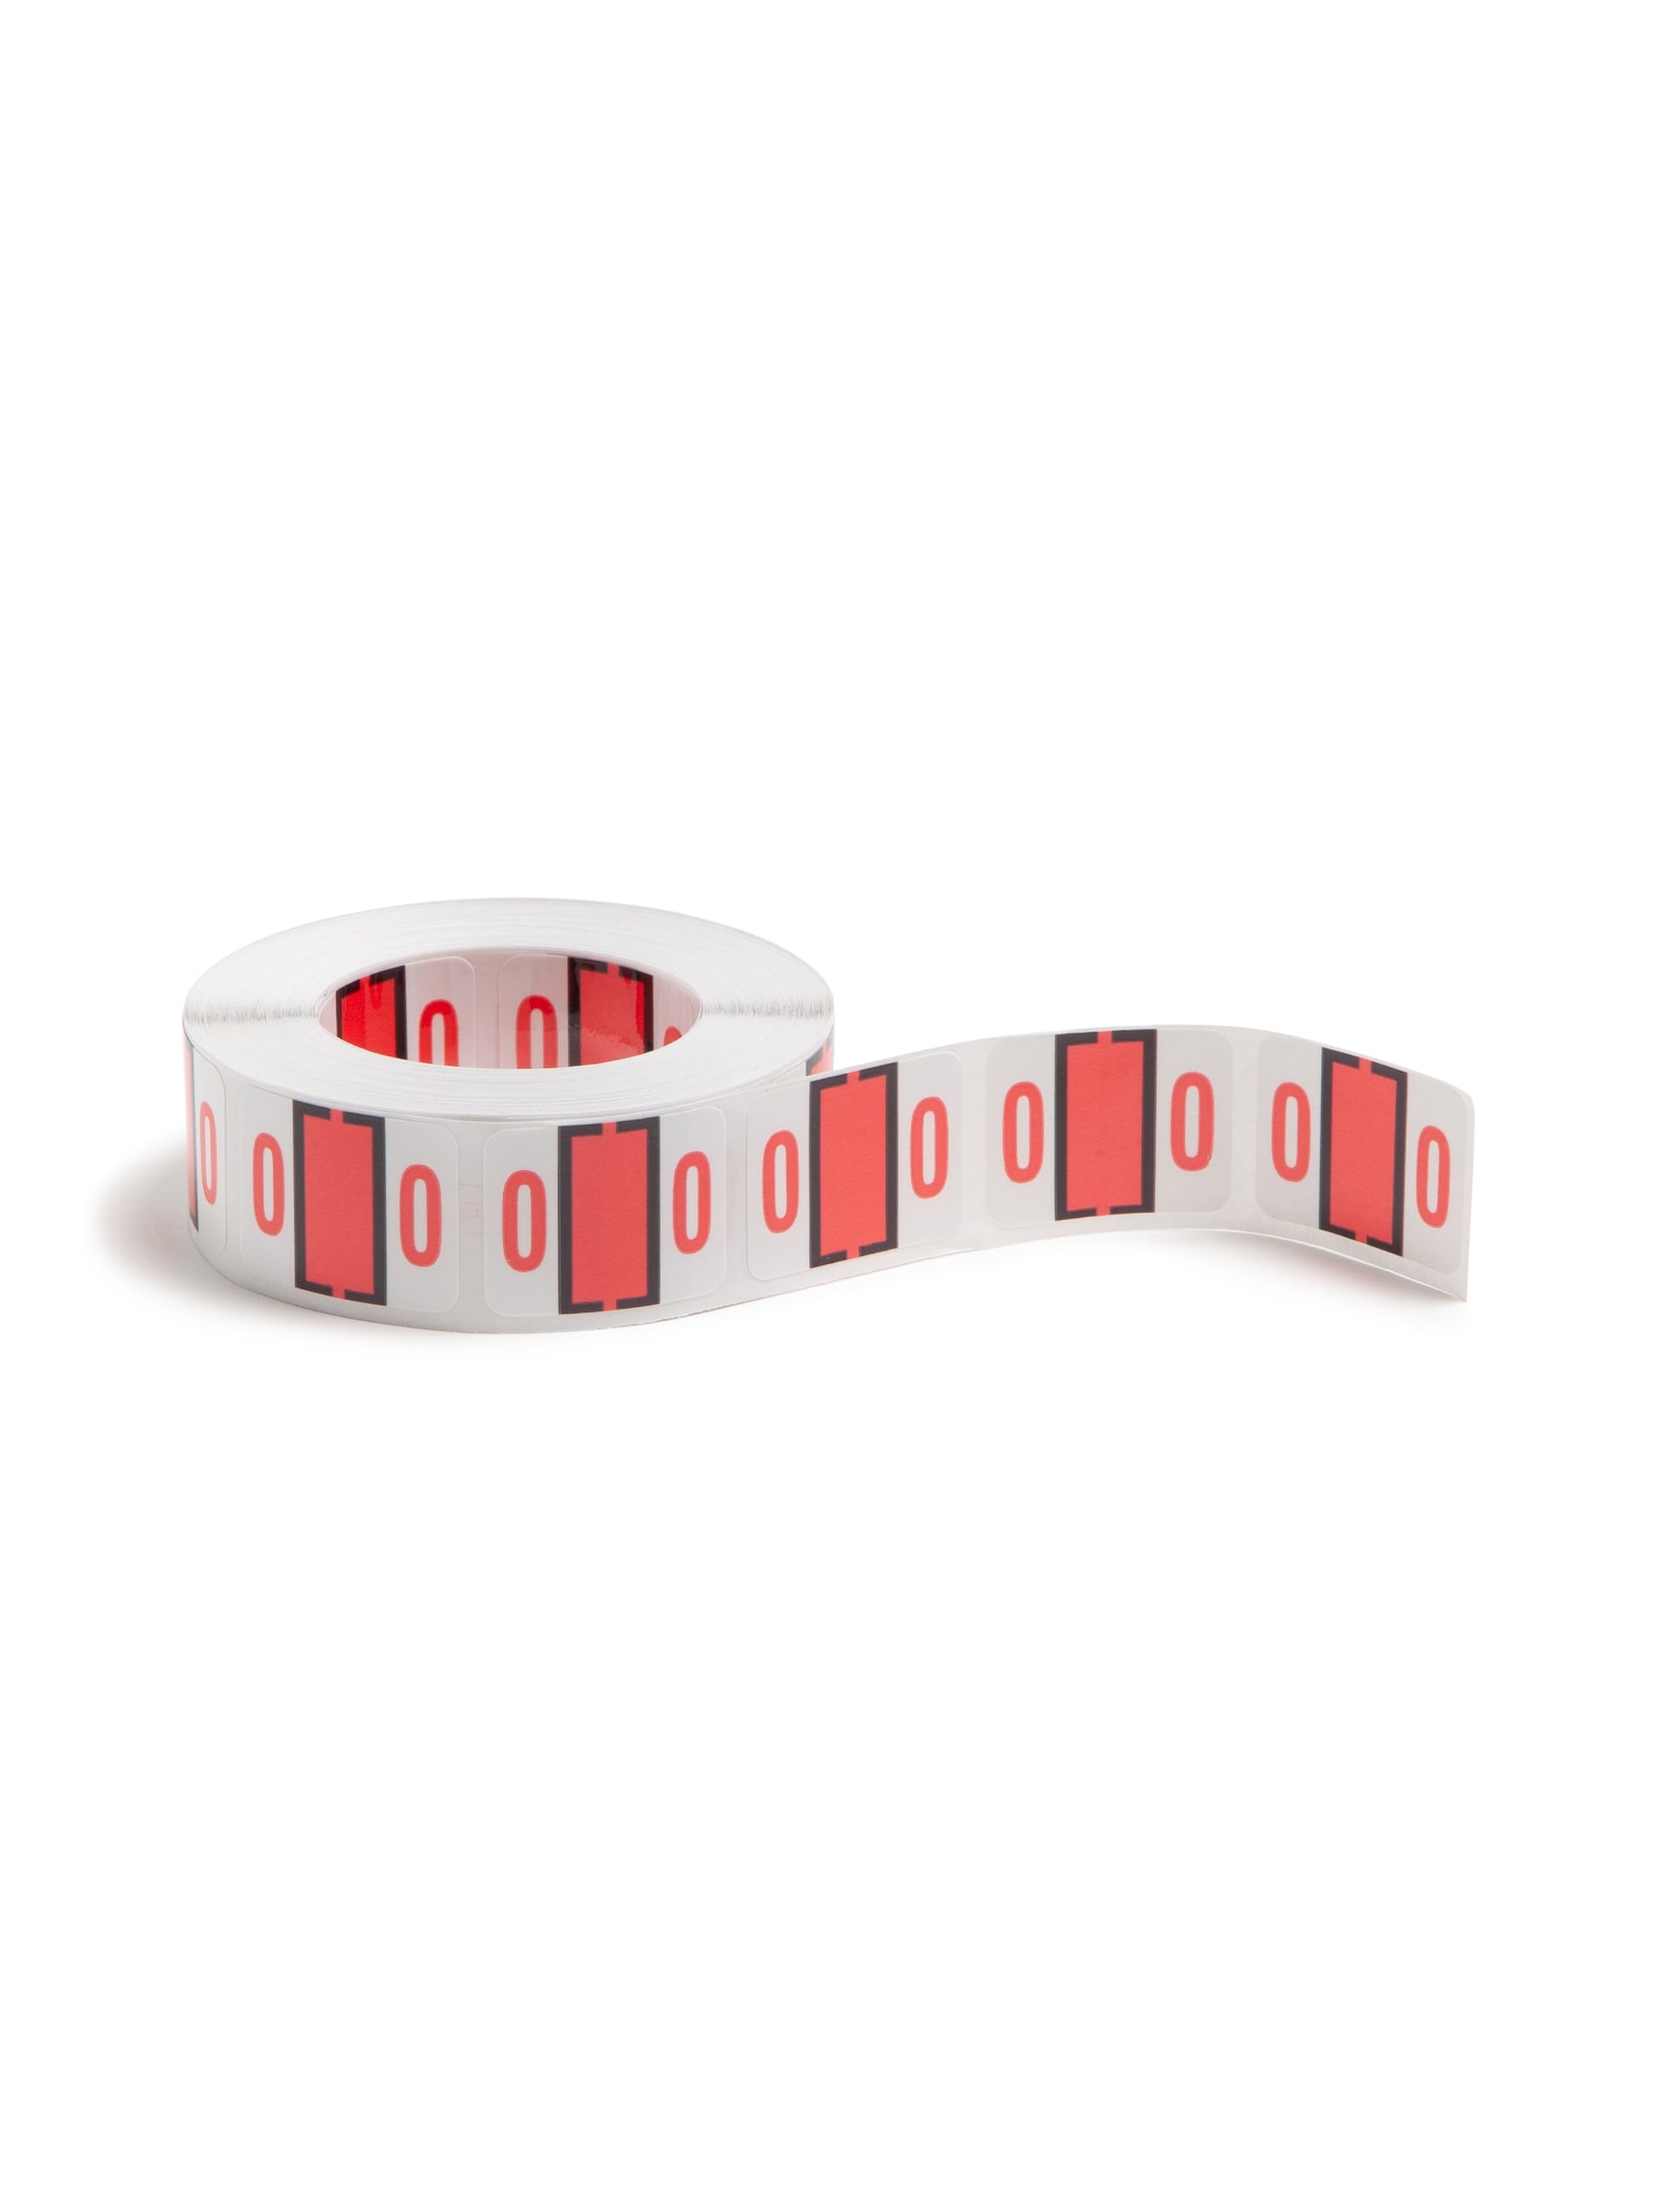 BCCRN Bar Style Color-Coded Numeric Labels, 0-9 Rolls, Pink Color, 1-1/4" X 1" Size, Set of 1, 086486673709